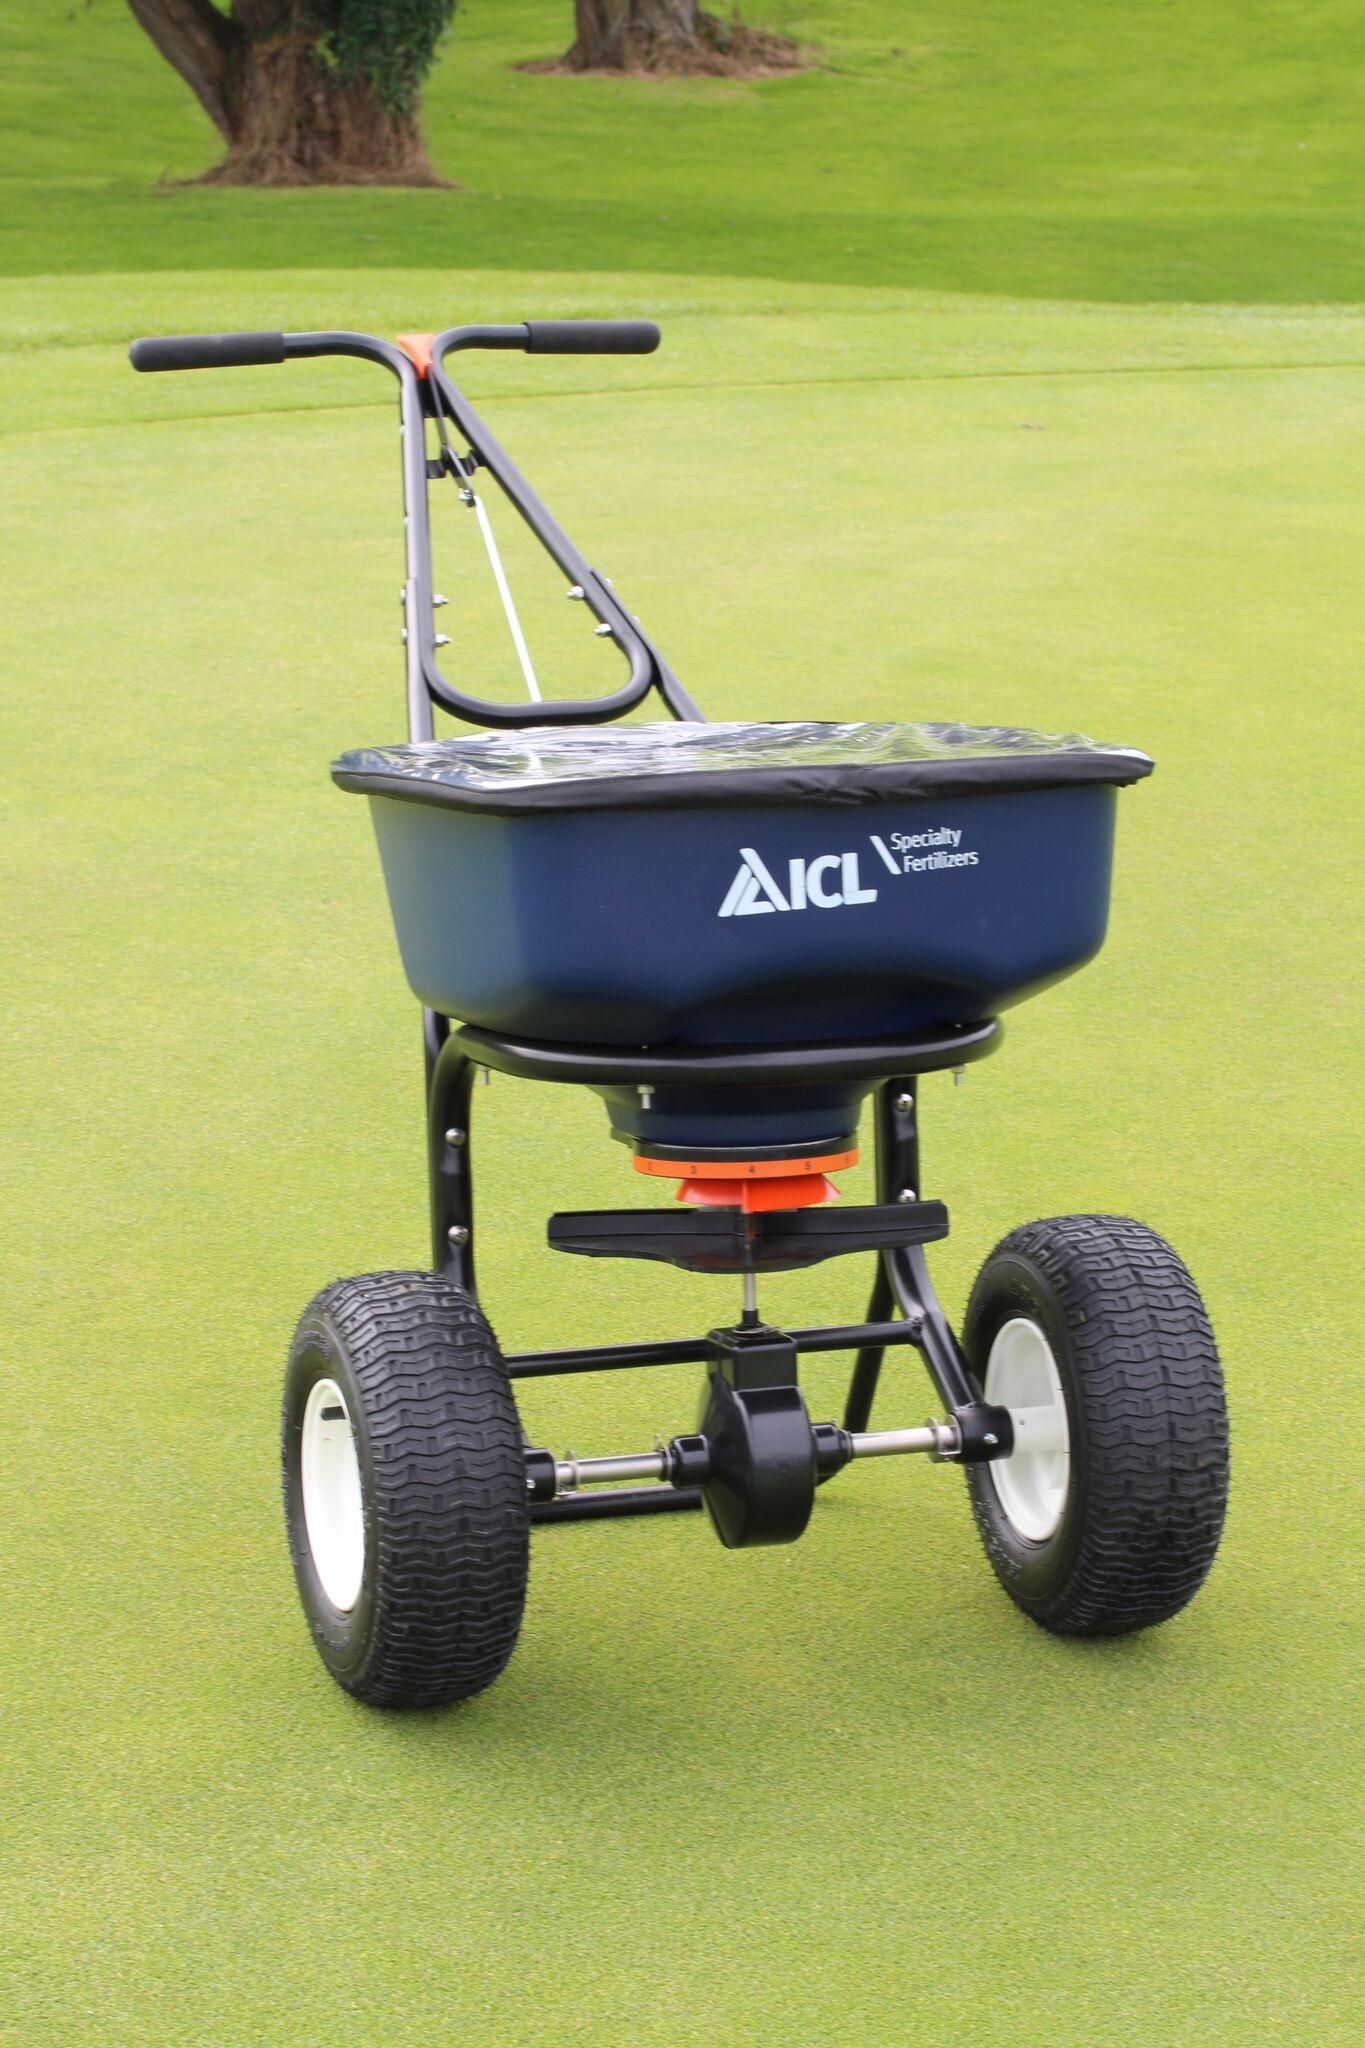 Rotary Spreaders | ICL Specialty Fertilizers